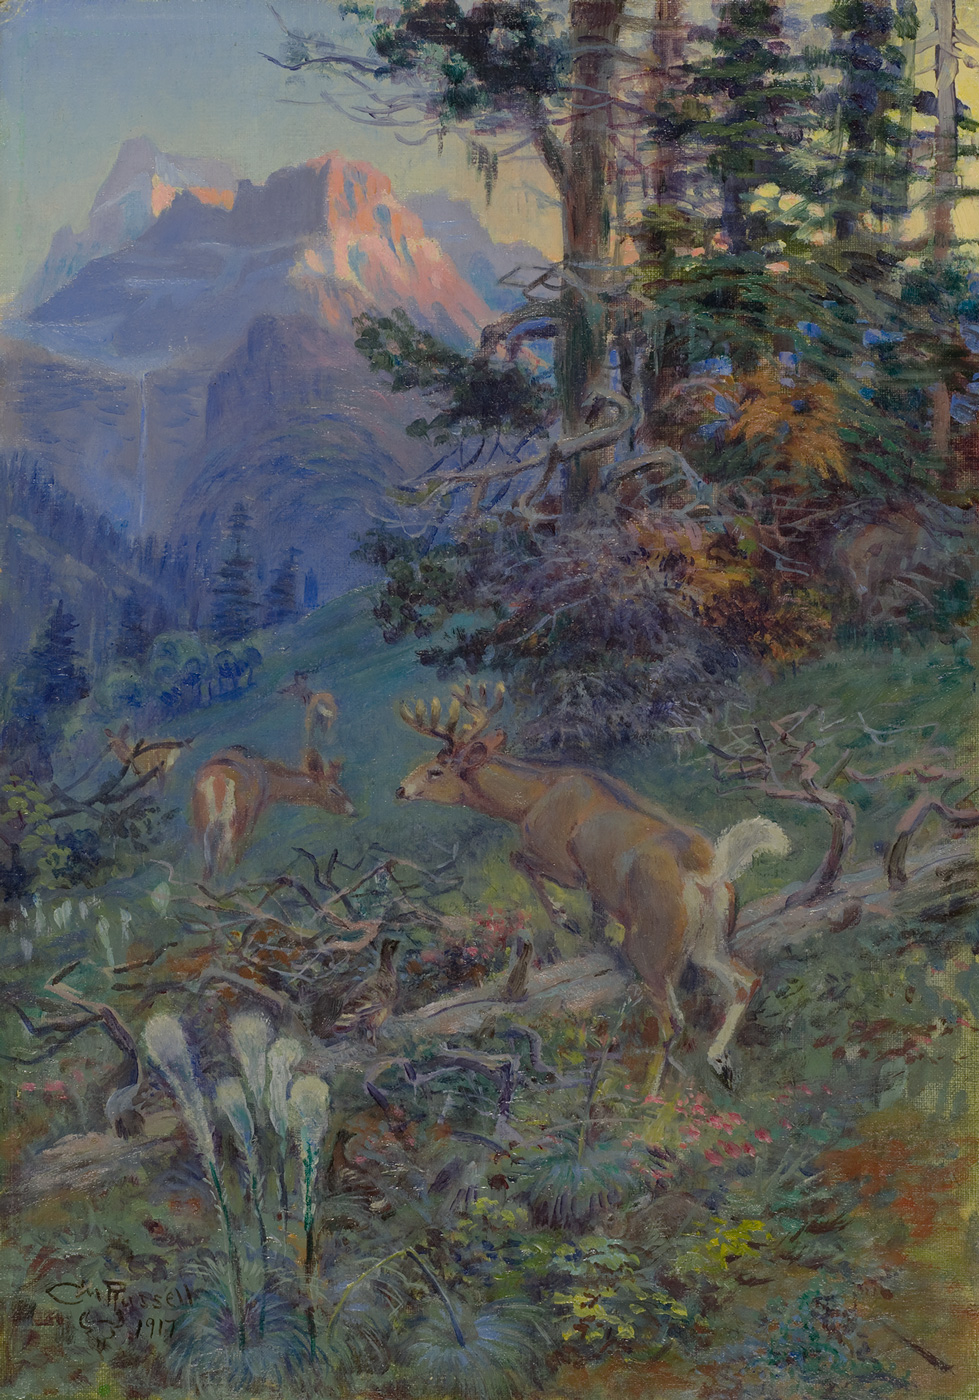 A group of white tailed deer move through a forested mountain landscape.